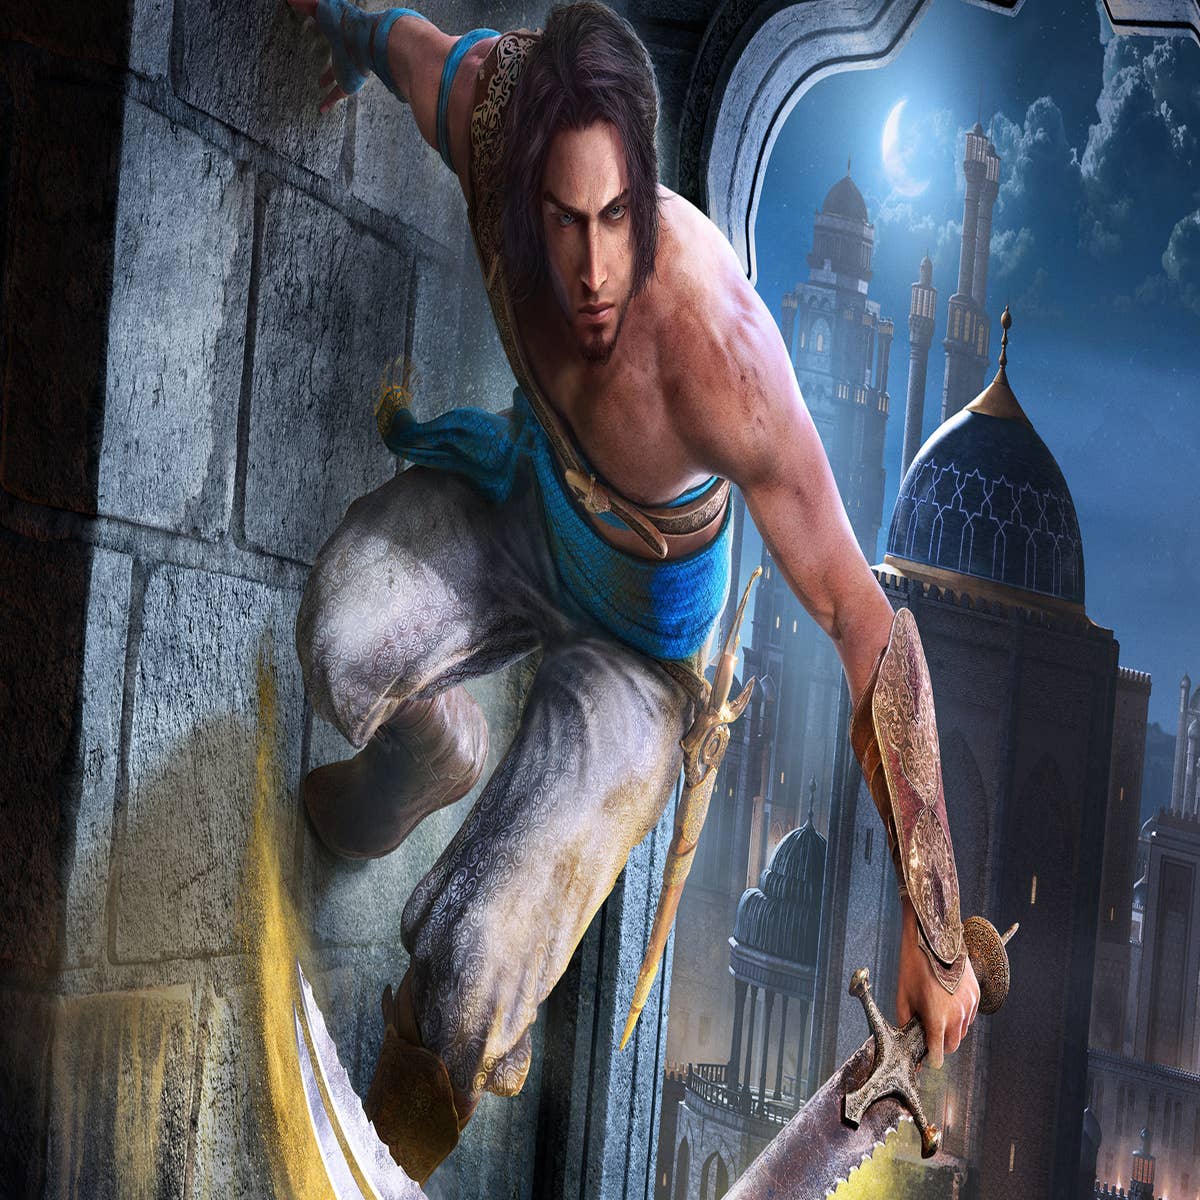 Prince of Persia: Sands of Time Remake appears to be coming to